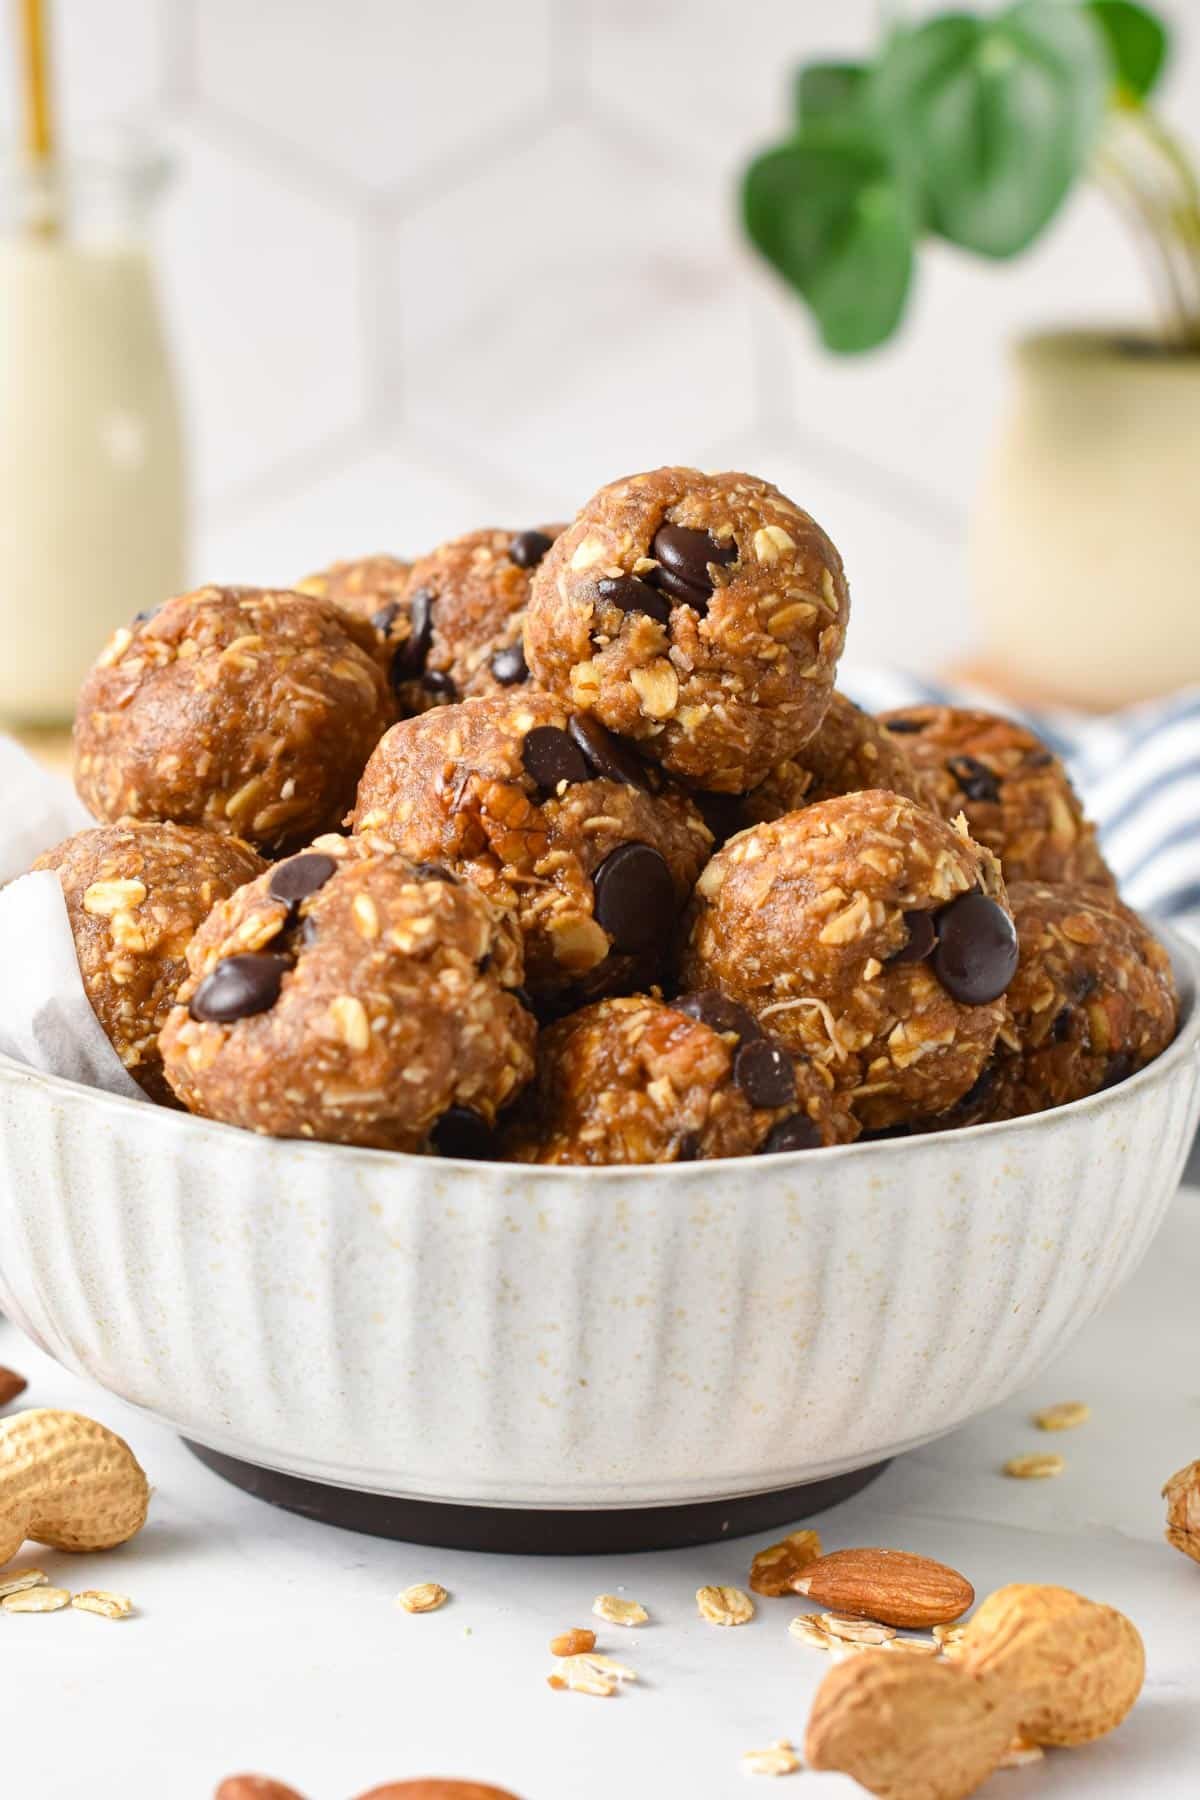 A bowl filled with No Bake Peanut Butter Oatmeal Energy Balls with chocolate chips.